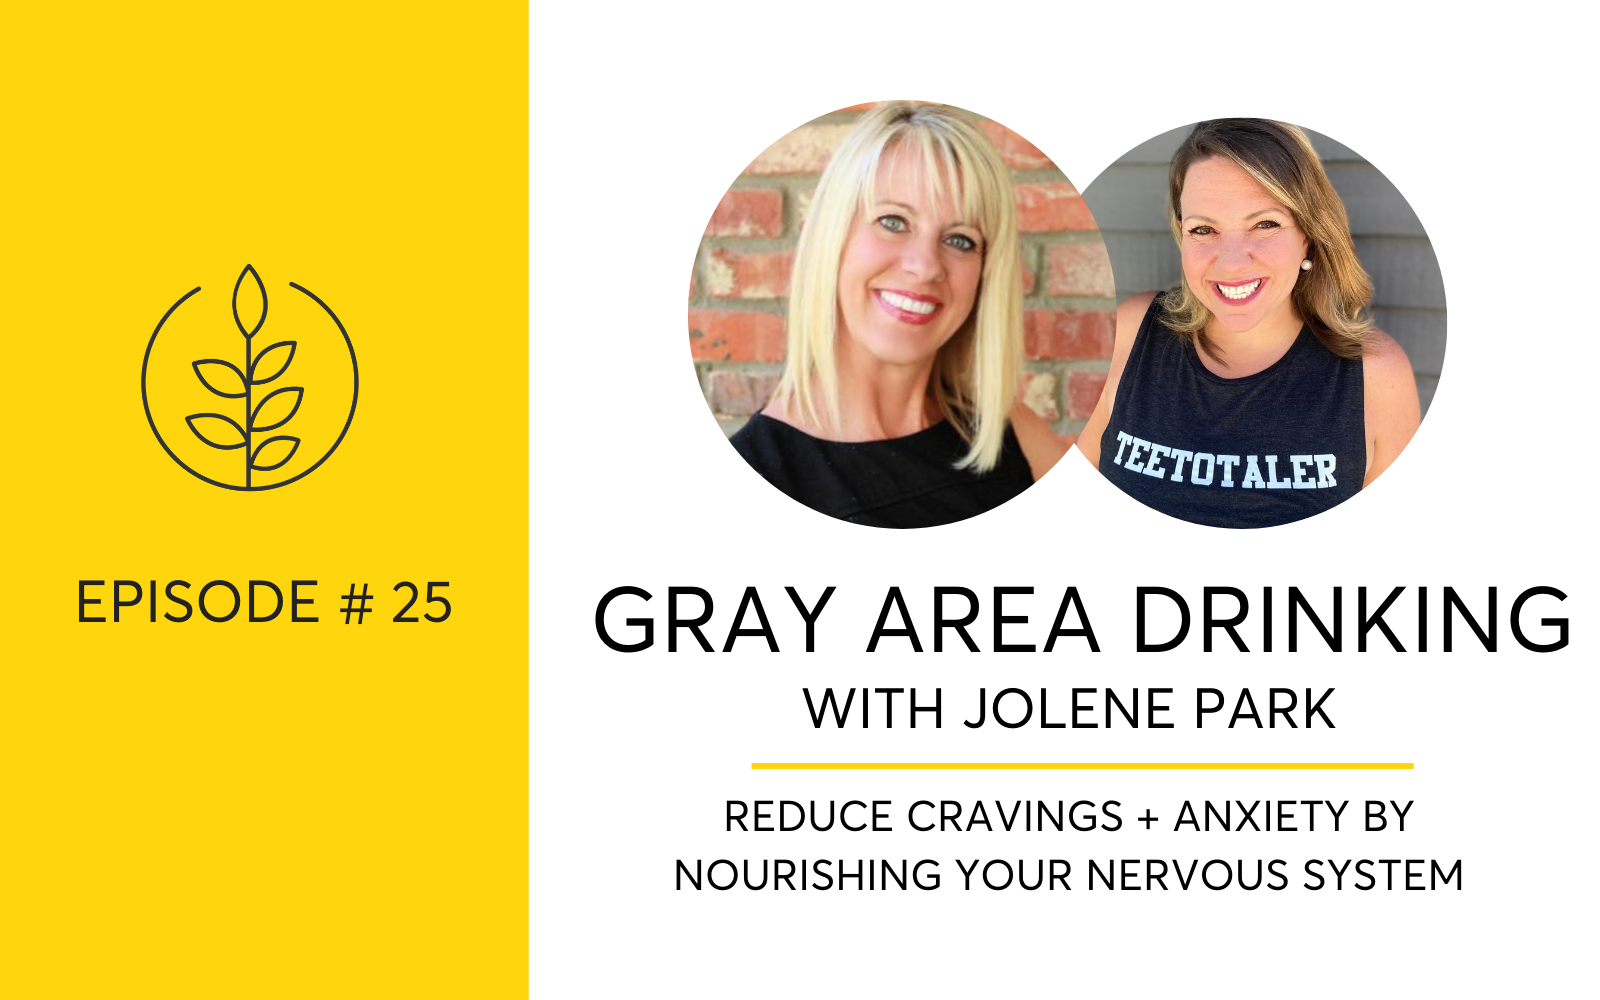 Are You A Gray Area Drinker? With Jolene Park